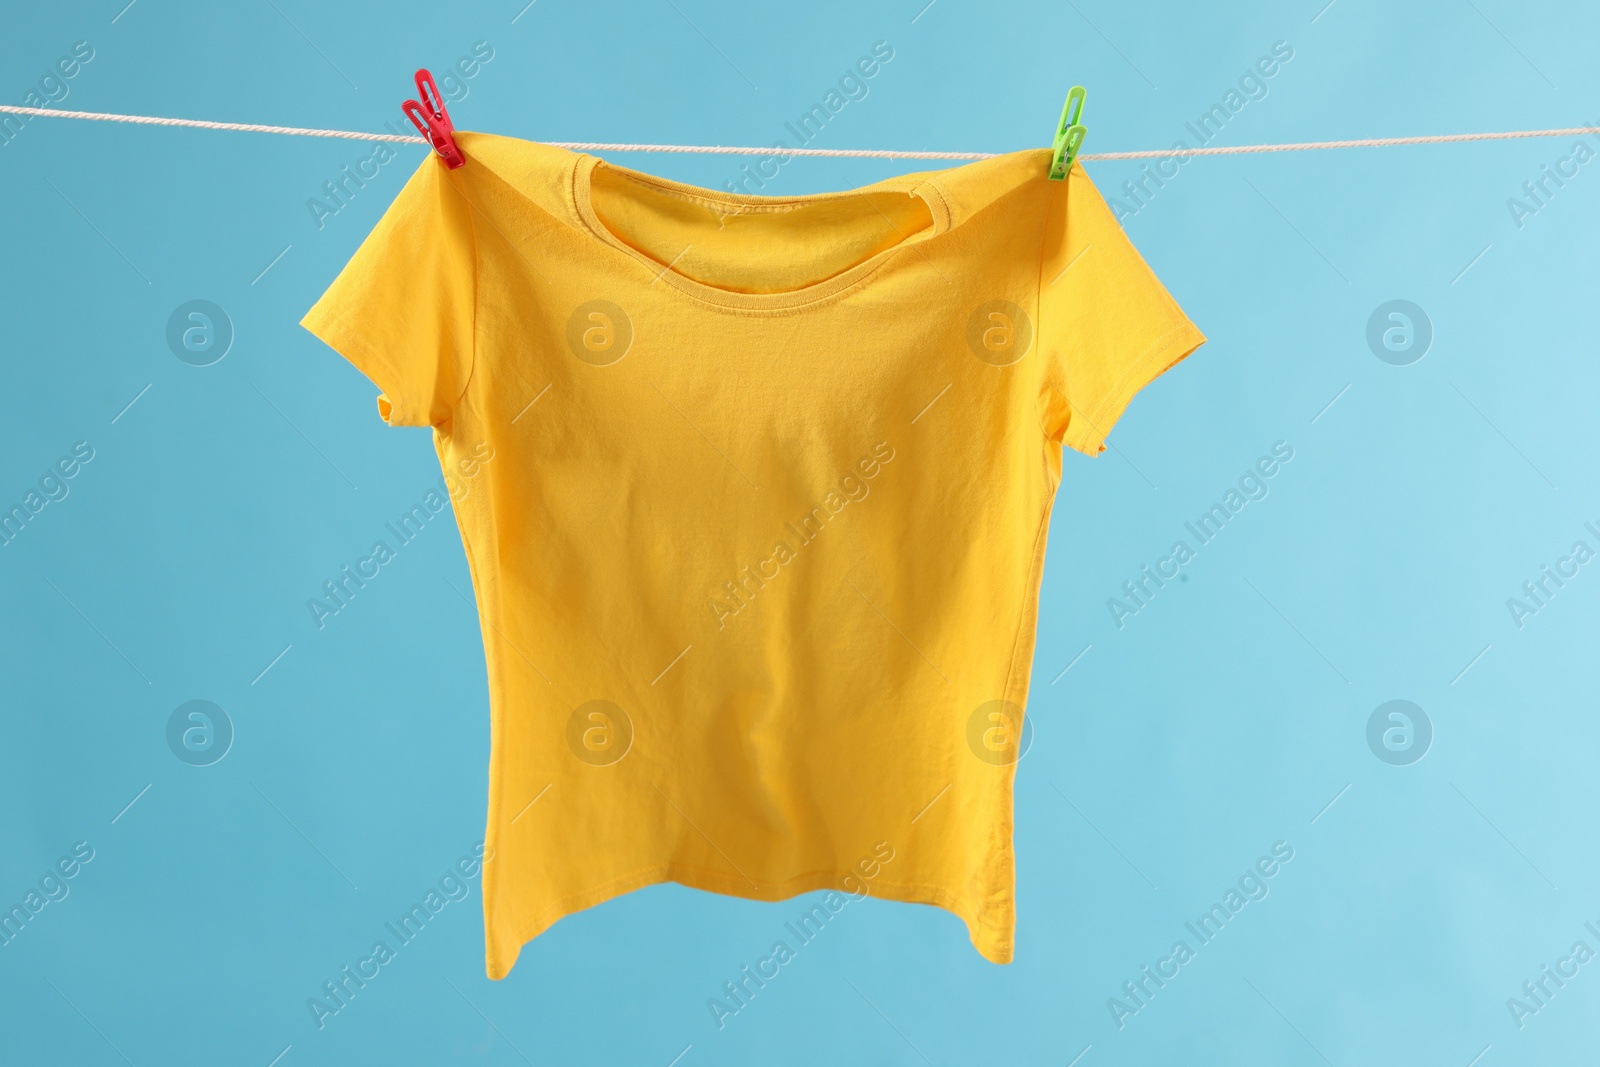 Photo of One yellow t-shirt drying on washing line against light blue background